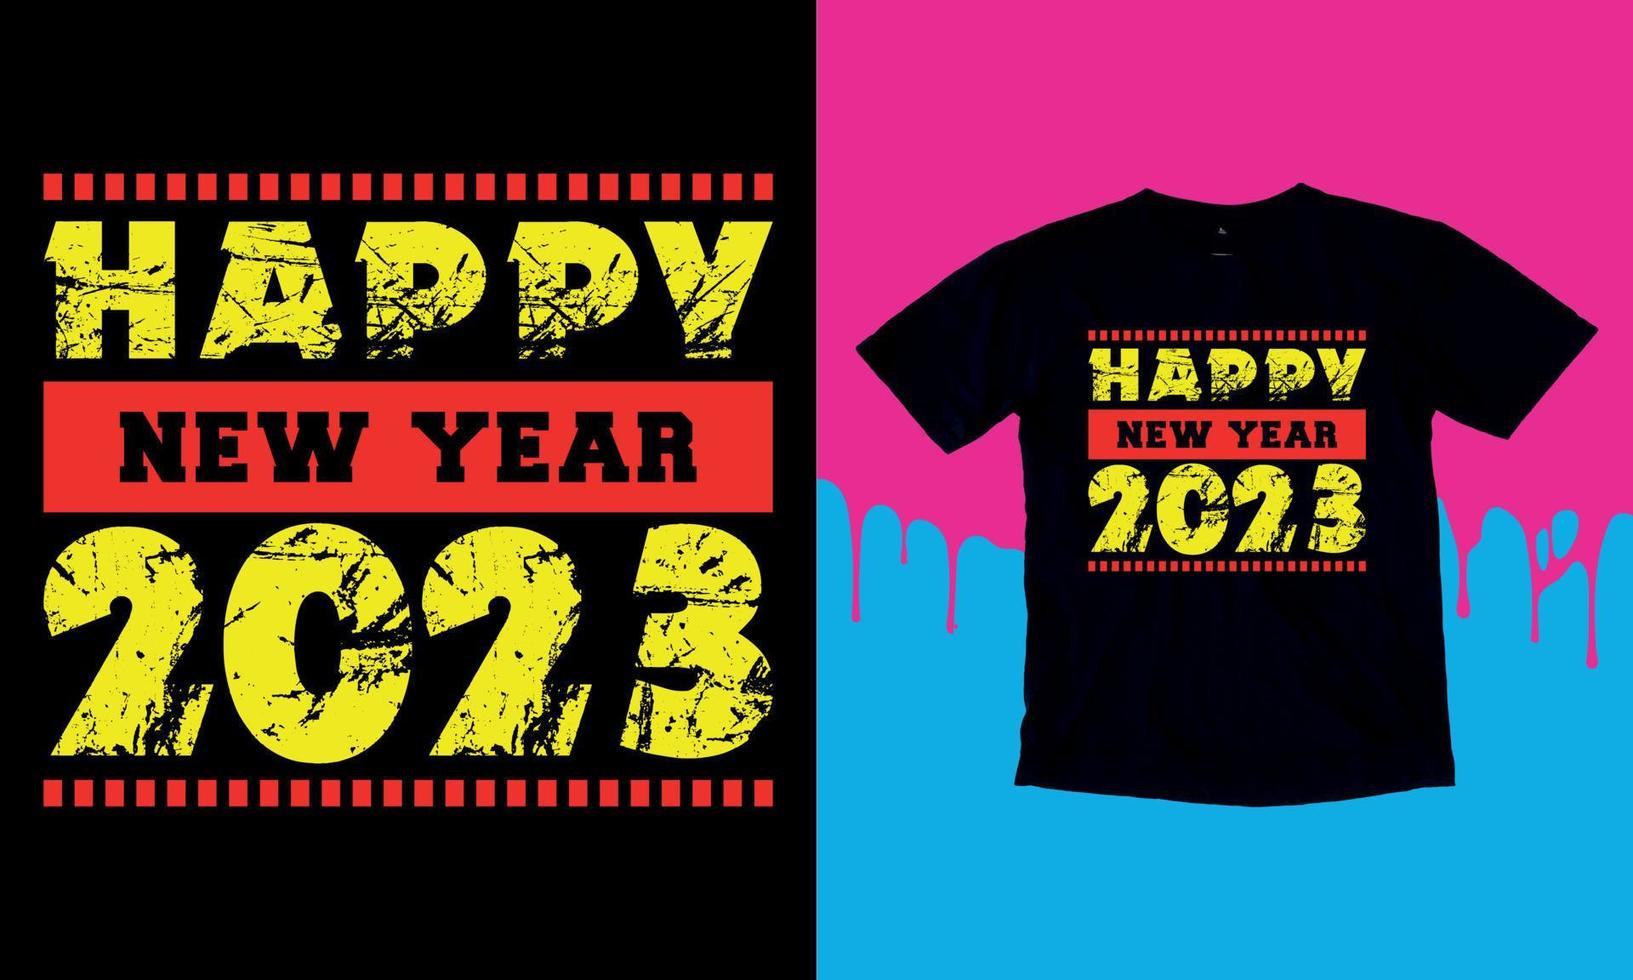 Happy New Year 2023, Happy New Year t shirt Design, lettering vector illustration isolated on Black background, New Year Stickers Quotas, bag, cups, card, gift.